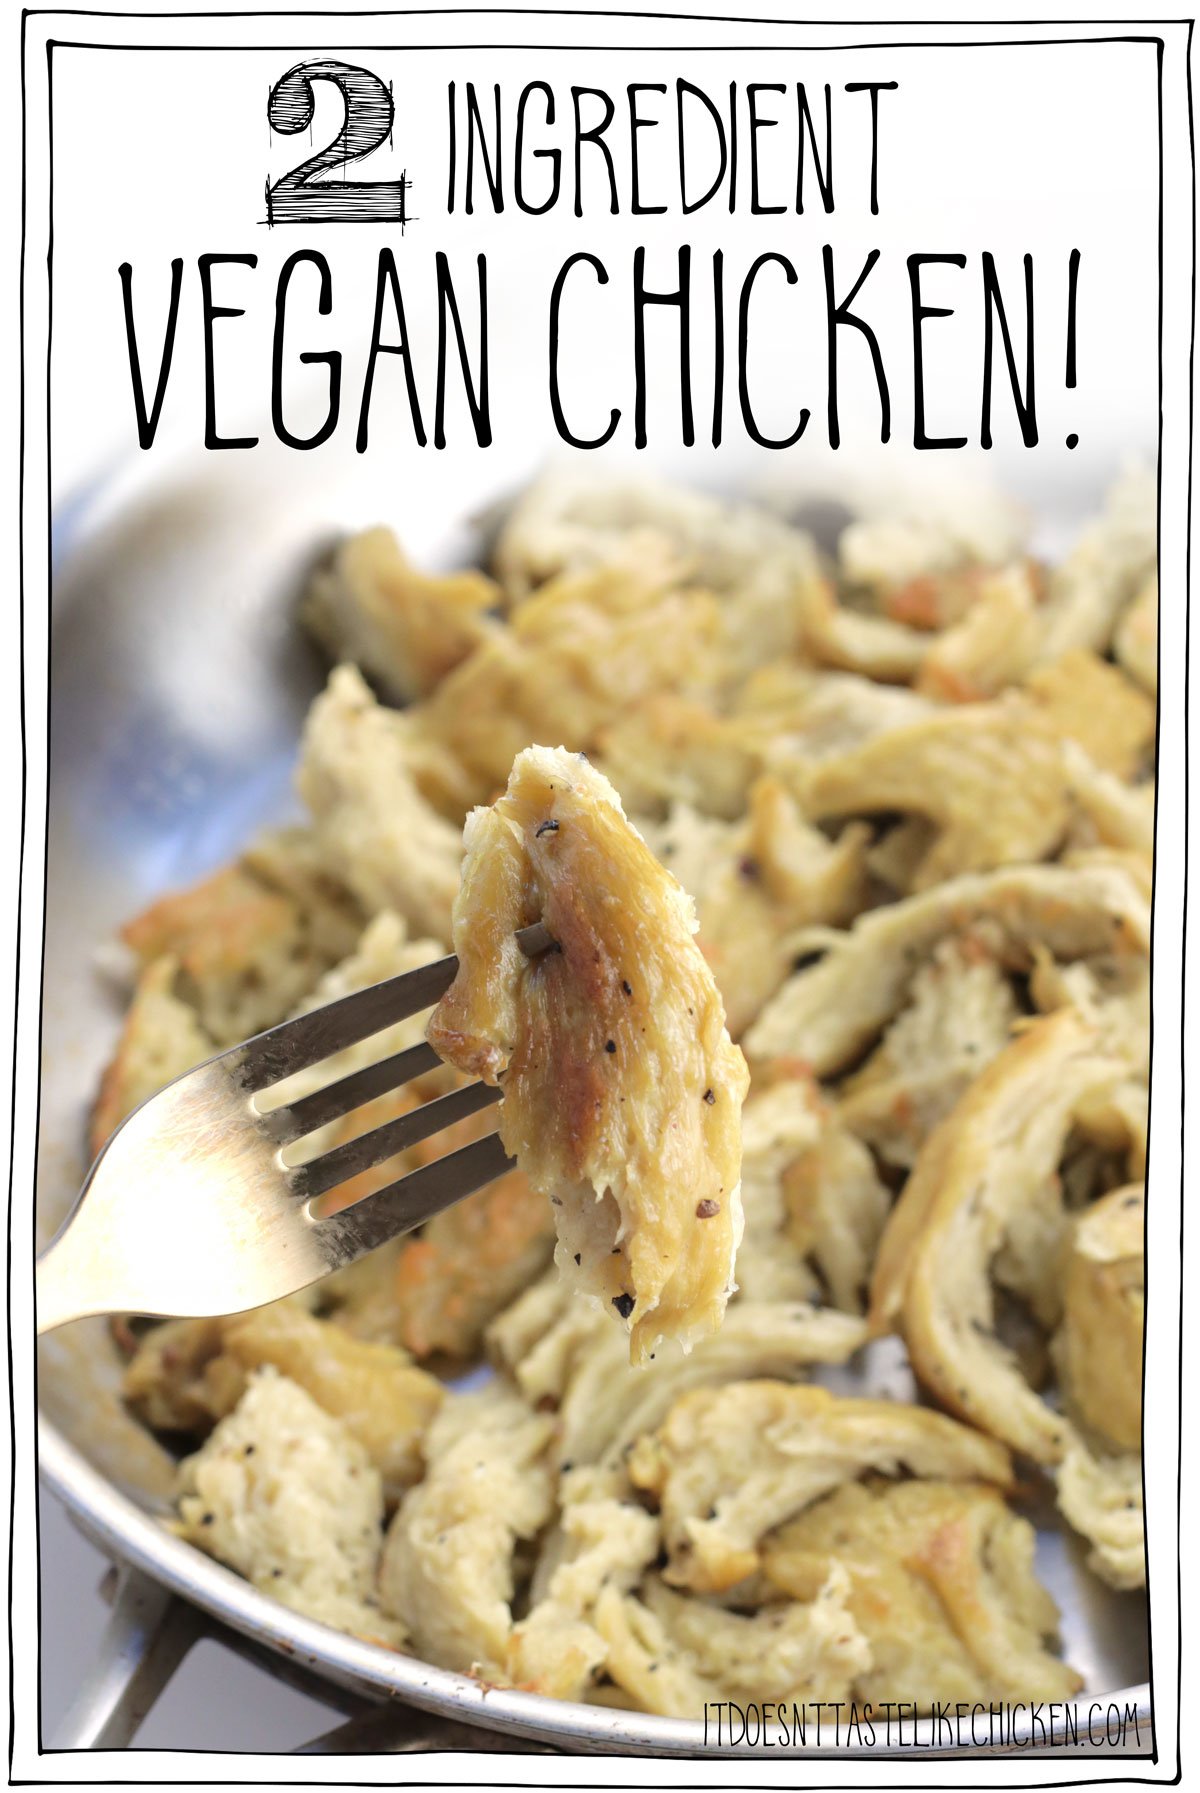 Making 2 ingredient vegan chicken is fun and although it's a bit time-consuming, each step is actually pretty easy, and the results are SO worth it. This is the most chicken-y vegan chicken I have ever tasted!! Washed flour seitan is chewy and juicy. The seitan pulls apart into shreds that are perfect for snacking on, or you can add them to practically any dish- pasta, sandwiches, salads, soups, wherever you like! #itdoesnttastelikechicken #veganchicken